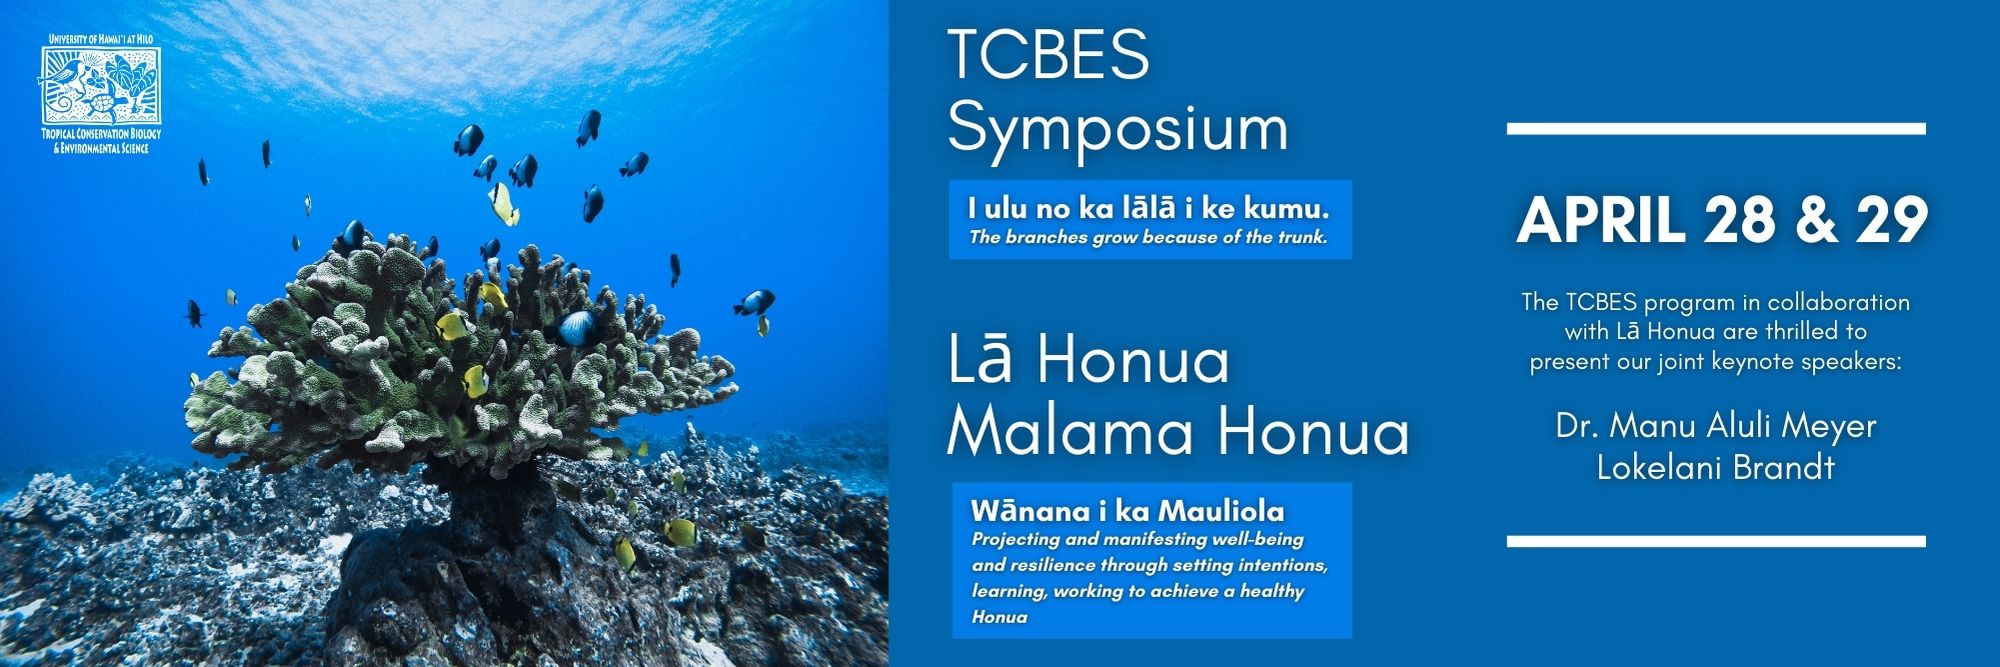 TCBES Symposium- I ulu no ka lālā i ke kumu (The branches grow because of the trunk), part of Lā Honua and Malama Honua: Wānana i ka Mauliola- Projecting and manifesting well-being and resilience through setting intentions, learning, working to achieve a healthy Honua. The symposium will take place April 28 and 29. The TCBES program in collaboration with Lā Honua are thrilled to present our joint keynote speakers: Dr. Manu Aluli Meyer and Lokelani Brandt